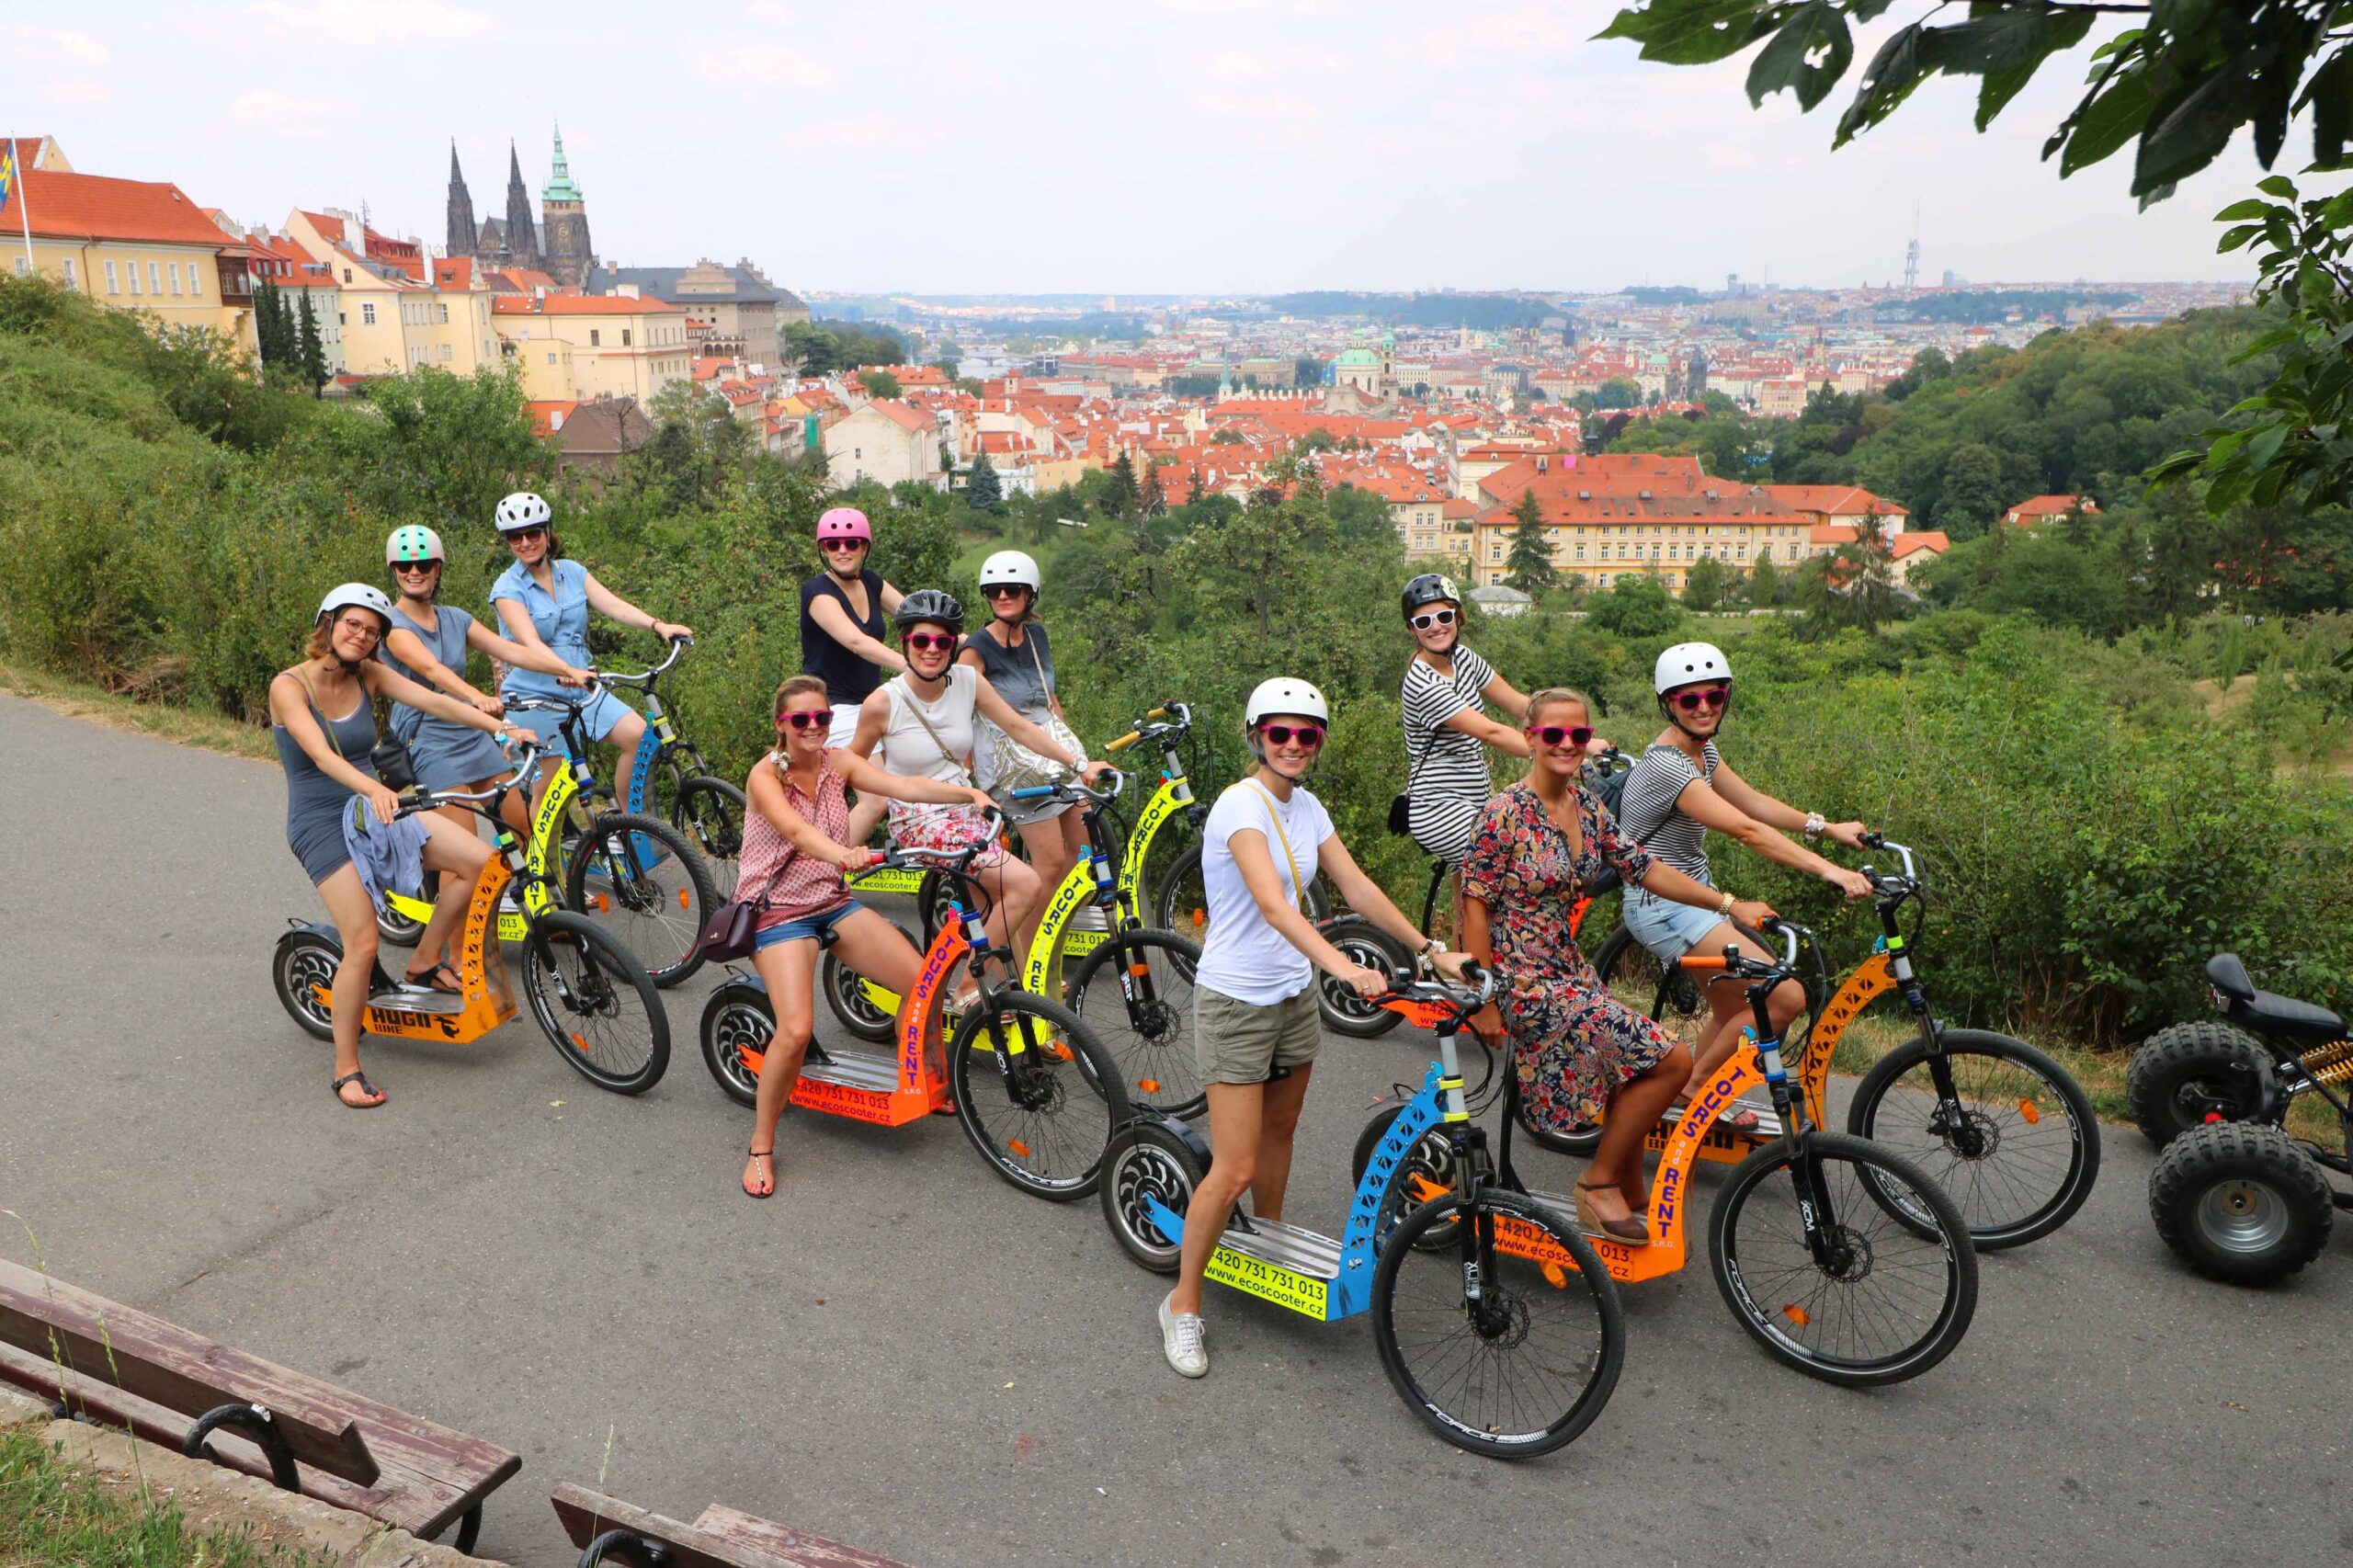 Viewpoint on electric scooter tour